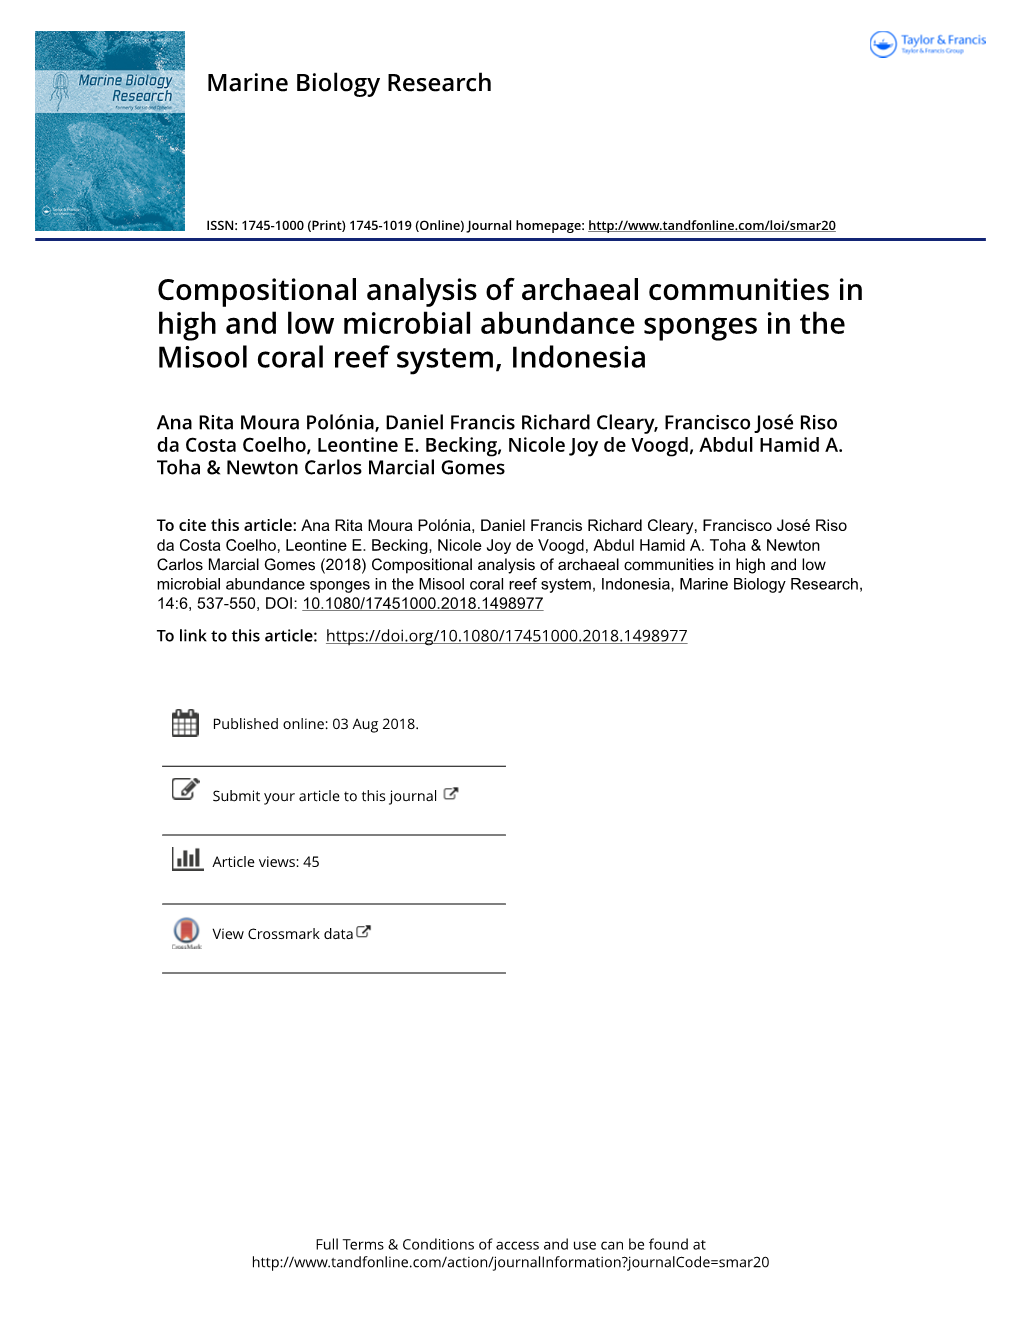 Compositional Analysis of Archaeal Communities in High and Low Microbial Abundance Sponges in the Misool Coral Reef System, Indonesia